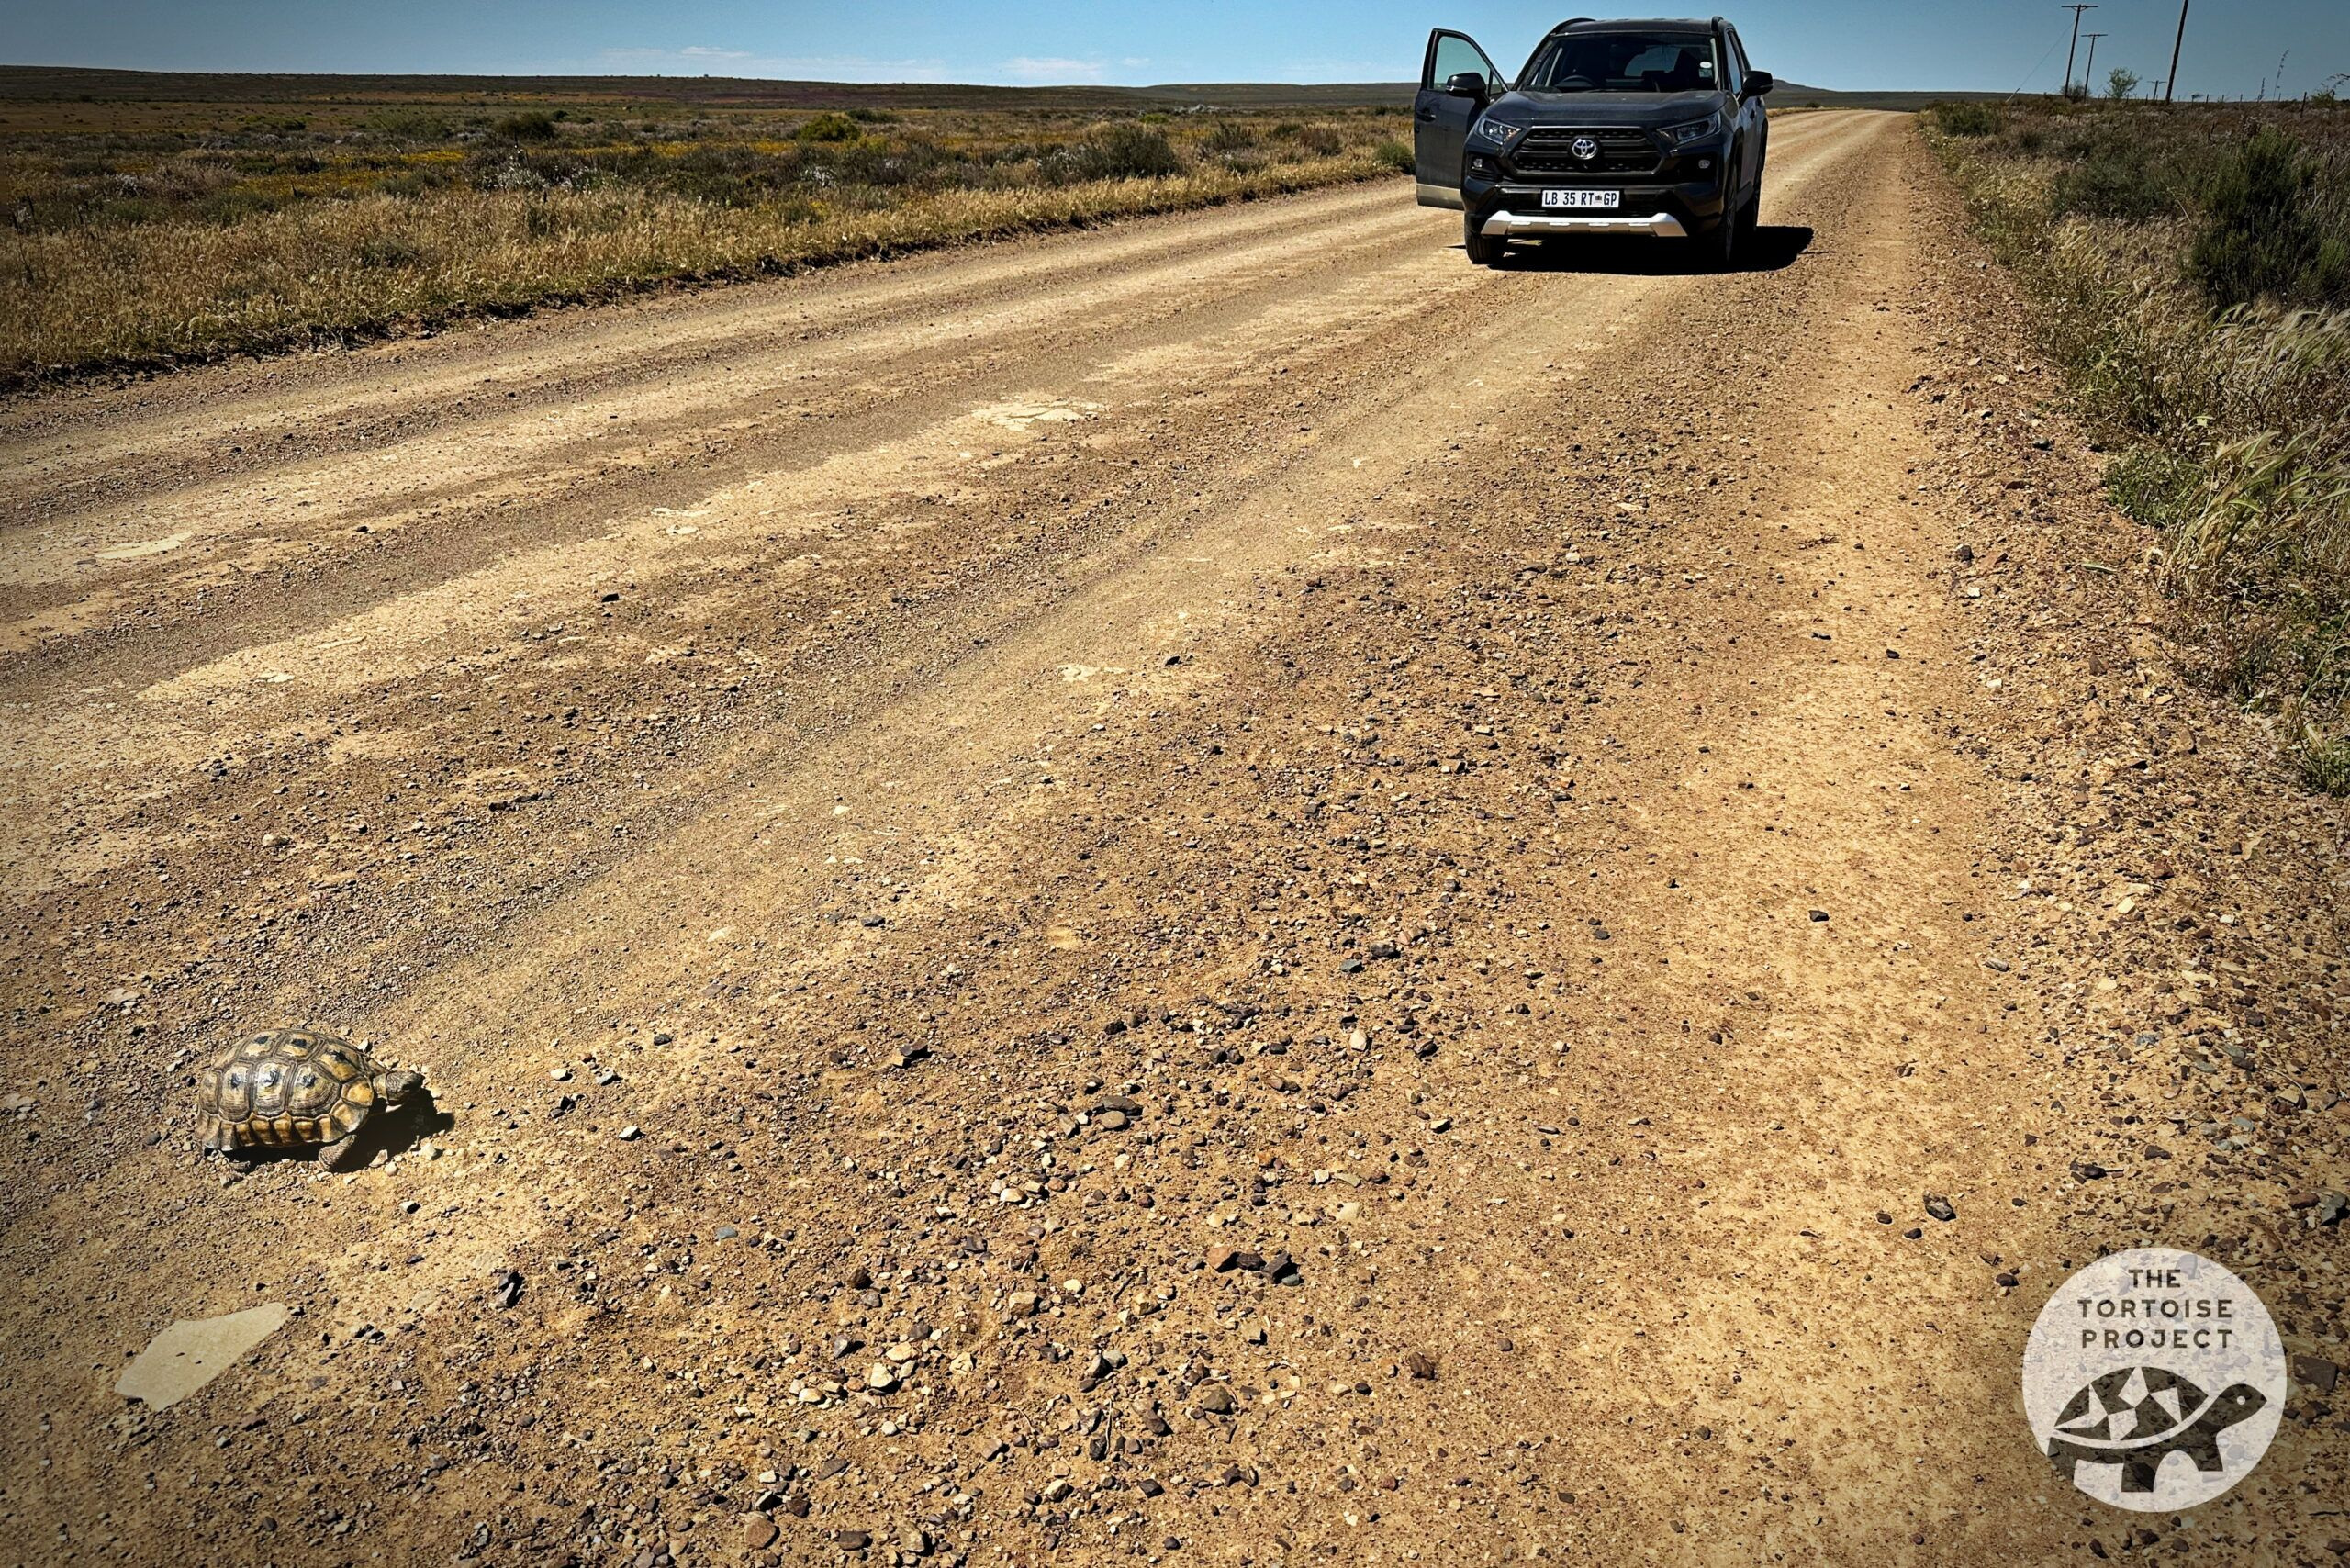 Near Nieuwoudtville, Northern Cape, South Africa — an Angulate tortoise (Chersina angulata) on the road.